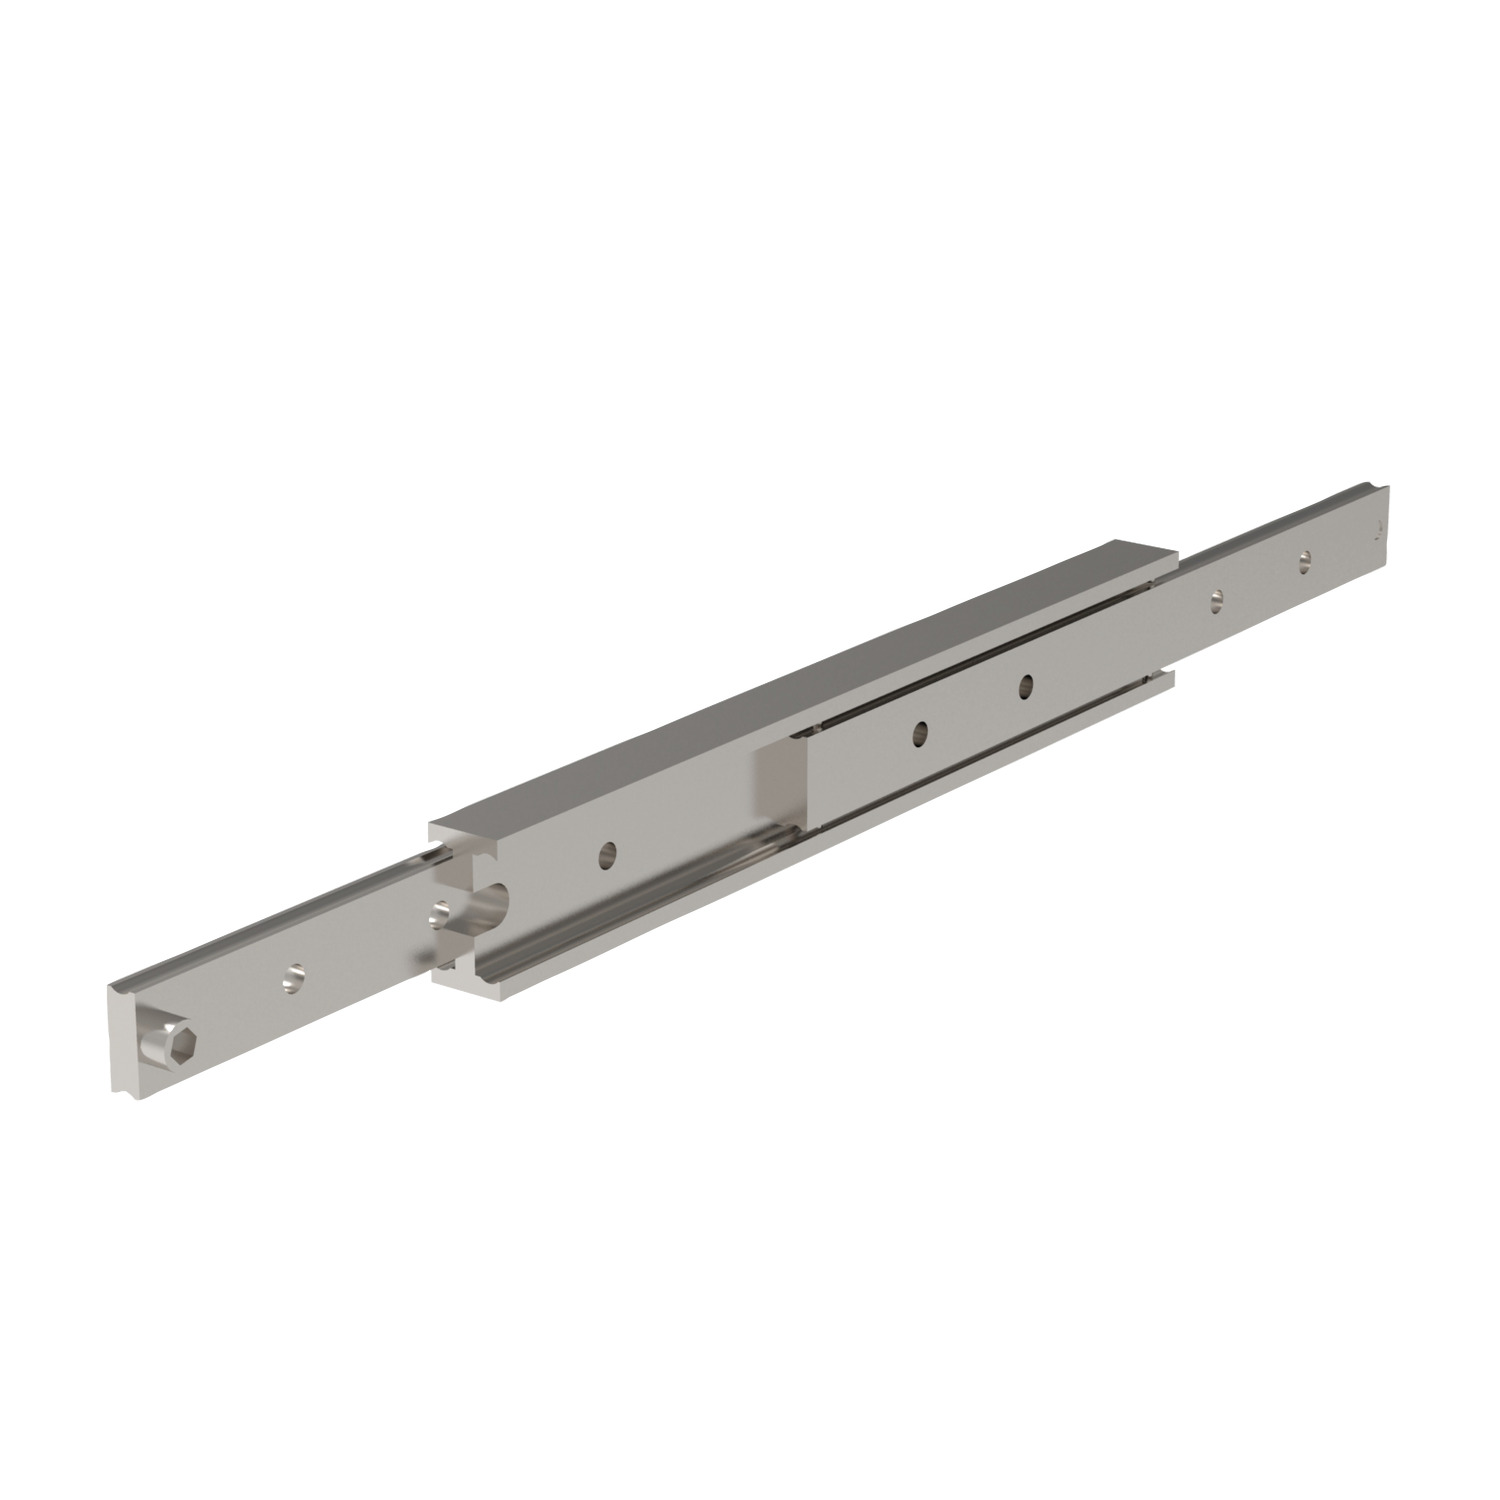 L2051.0200 Stainless AISI 316 slide l 200 size 40 Stainless steel (A4,AISI 316) -rail , balls & cage